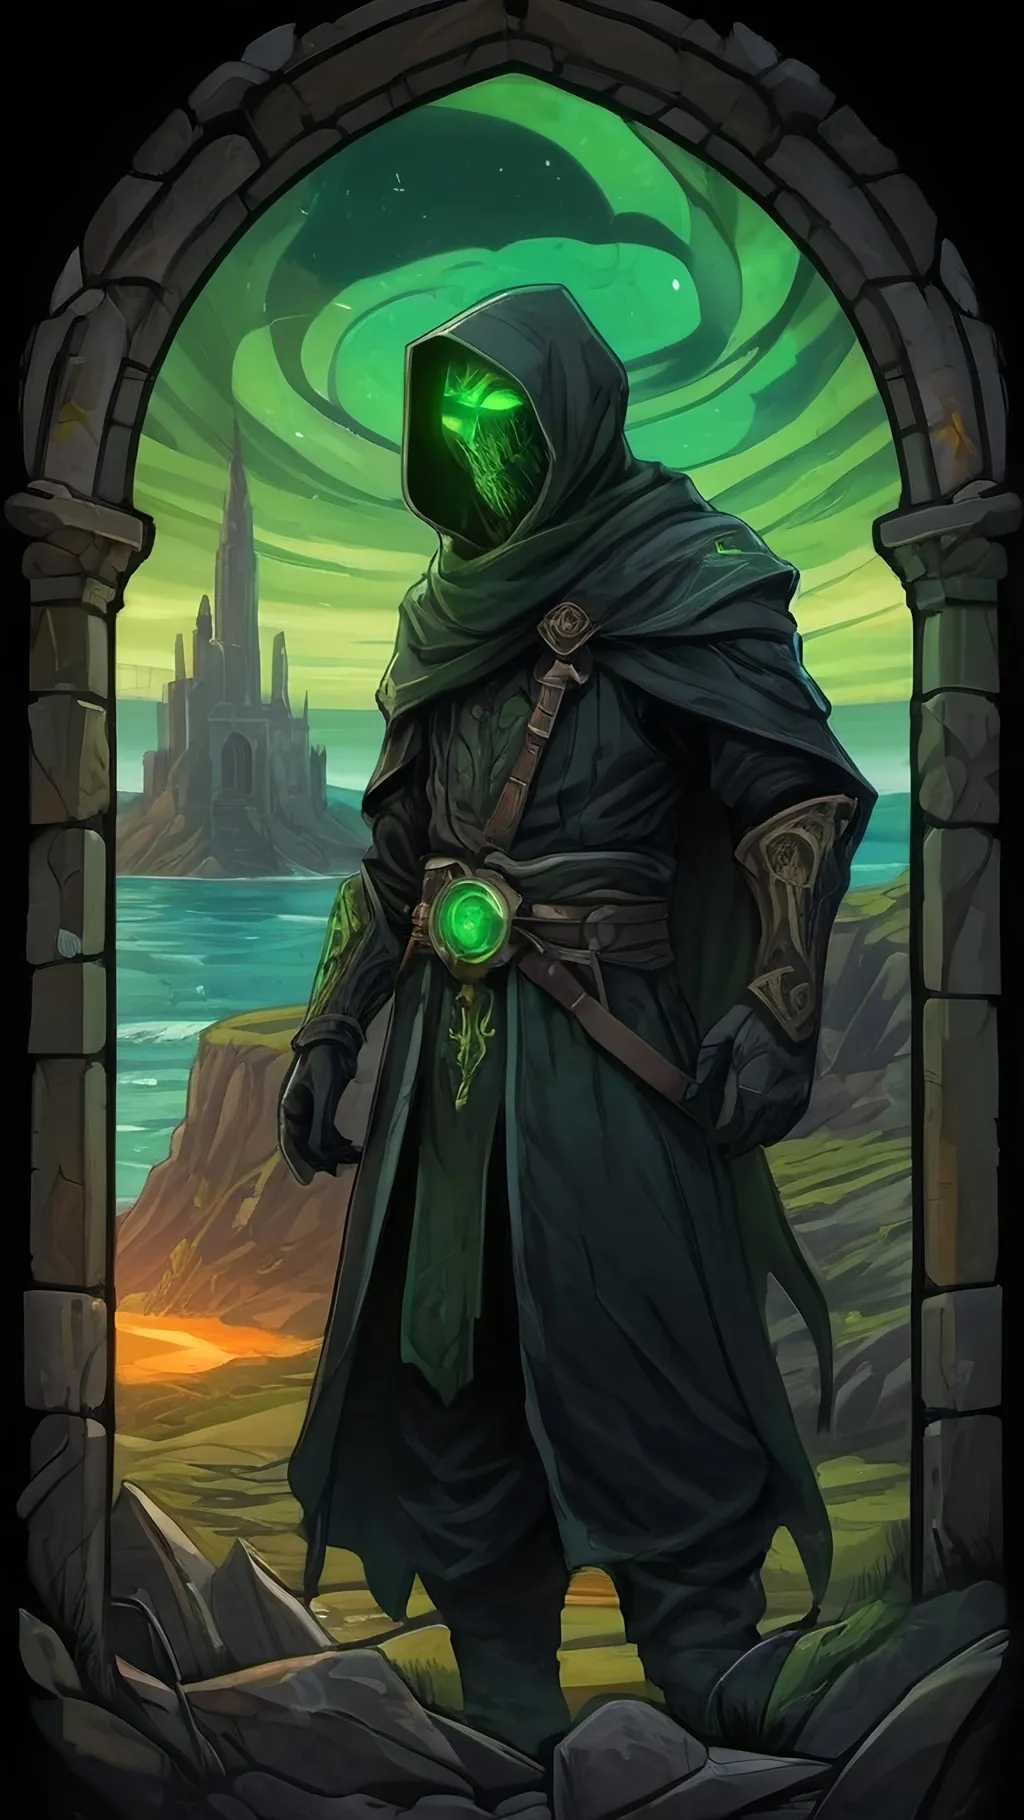 Prompt: A cryptic and majestic corpse reanimated with glowing green arcane runes and channels running across their decayed skin. He is wearing baggy black clothes and a green bandanna. He is standing on a stone outcrop overlooking a vast sea with a ruined castle in the distance. Vector style, color enhance